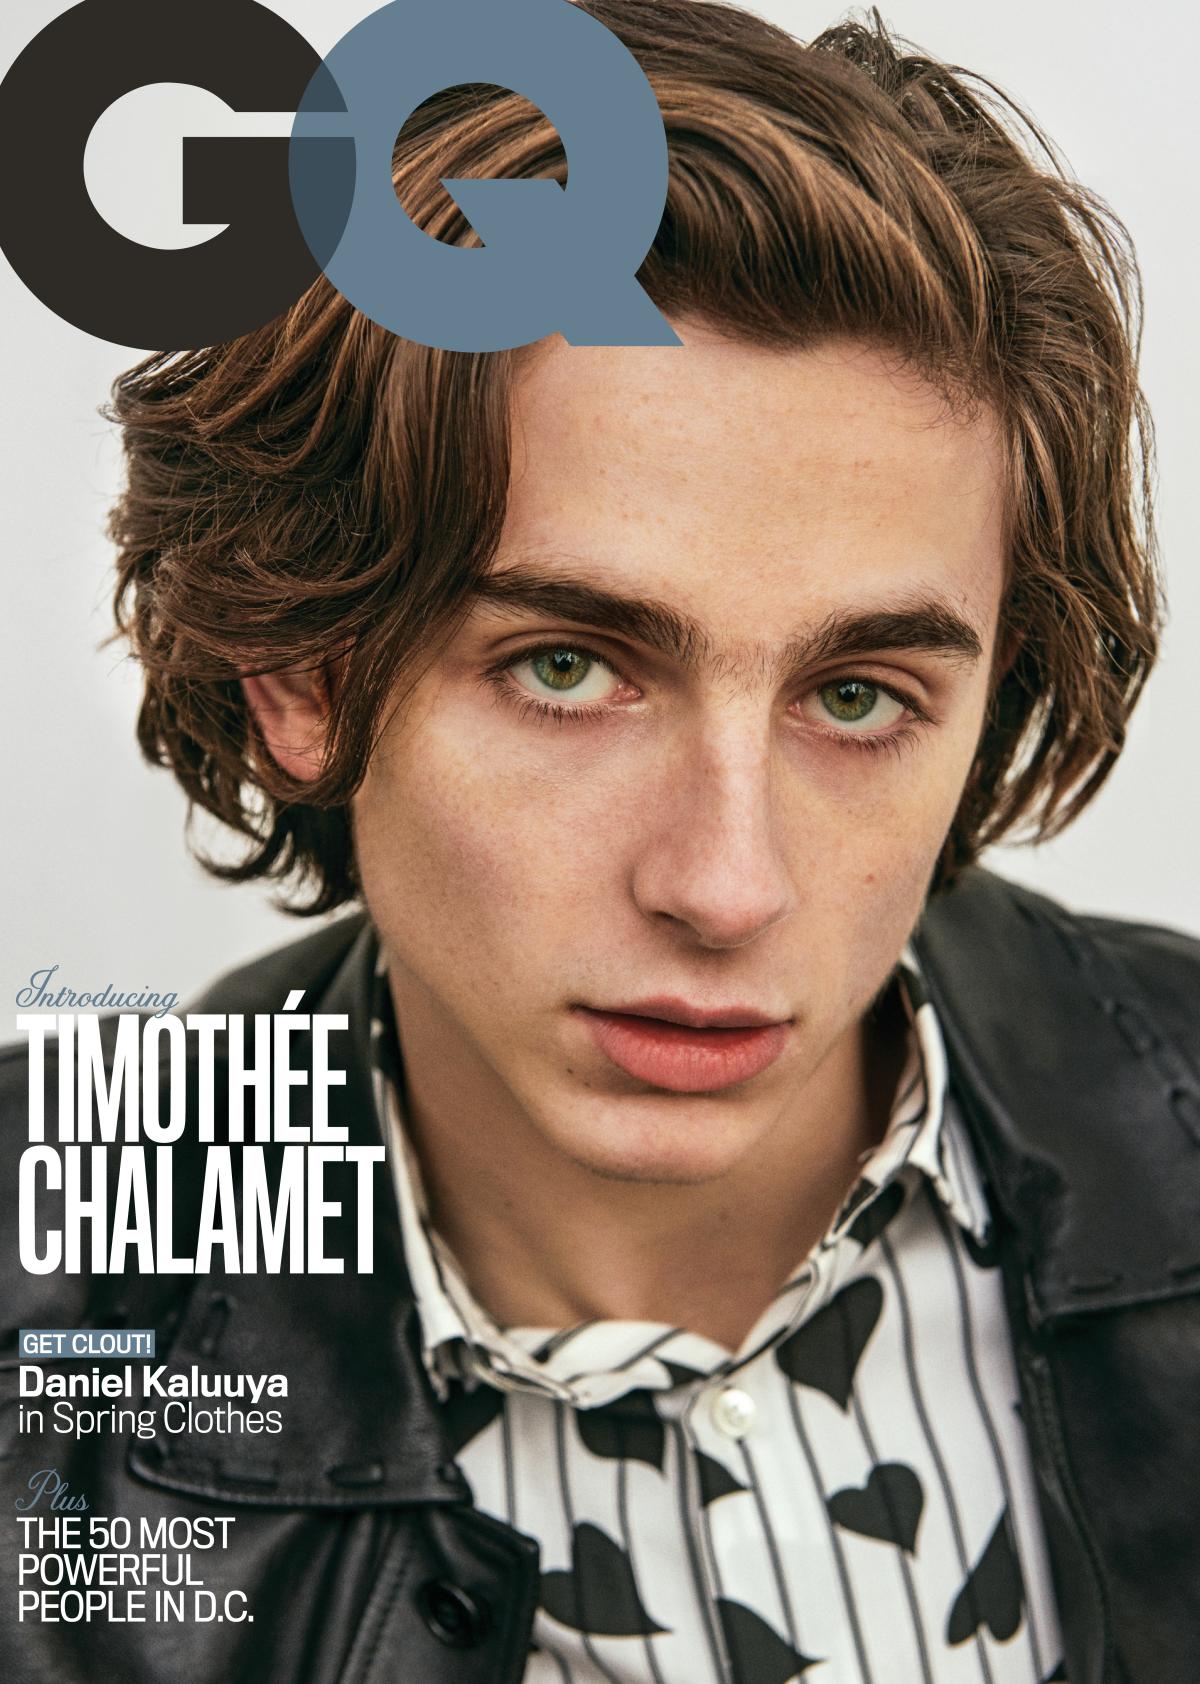 Actor Timothee Chalamet on His Racy Scene in 'Call Me by Your Name